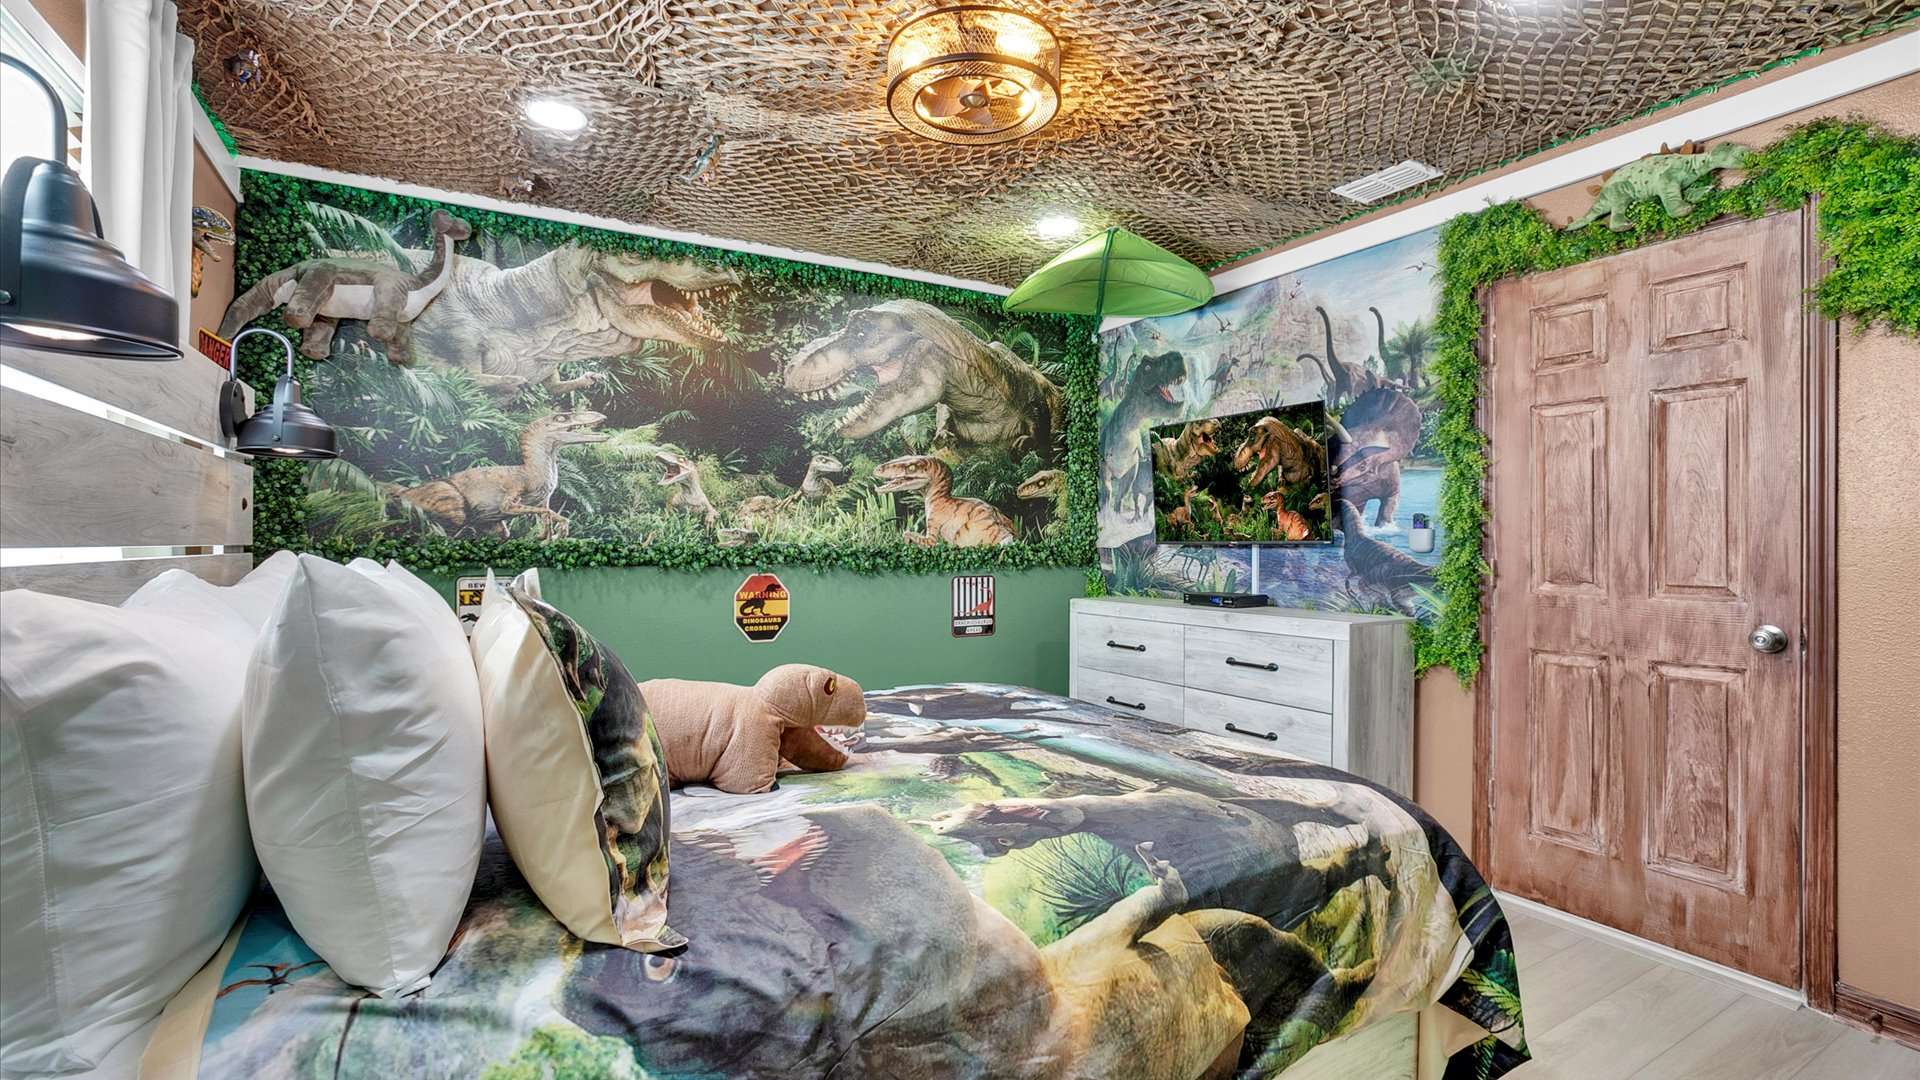 Queen Bedroom 5 Upstairs
Shared Bathroom
Jurassic Park Theme